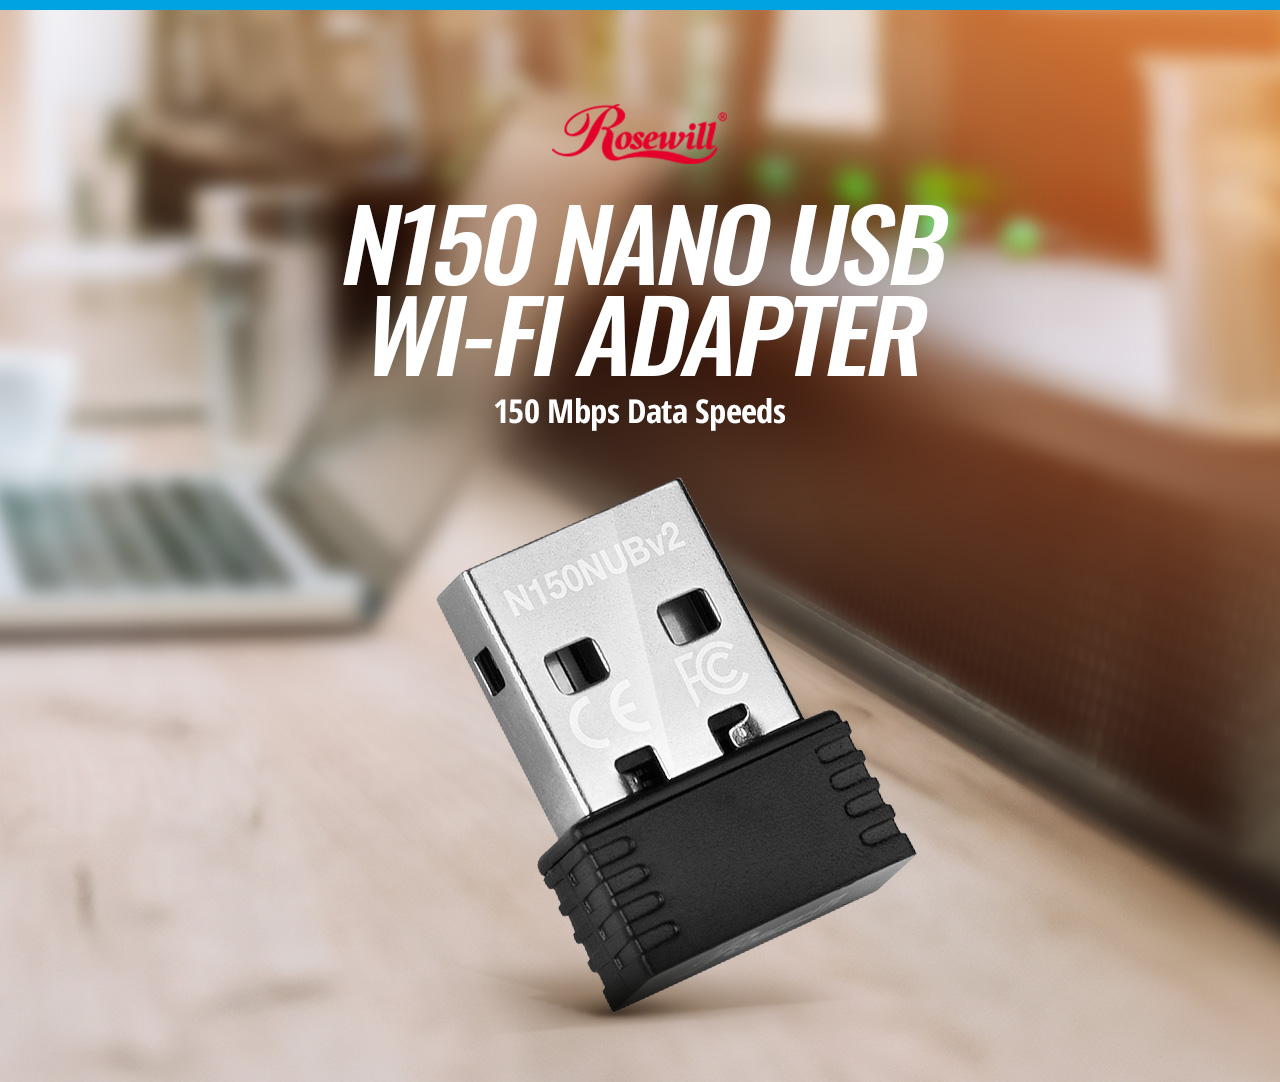 Rosewill RNX-N150NUBv2 NANO USB WI-FI ADAPTER 150 Megabits per second Data Speed tilted up to the right on a kitchen counter in front of a laptop